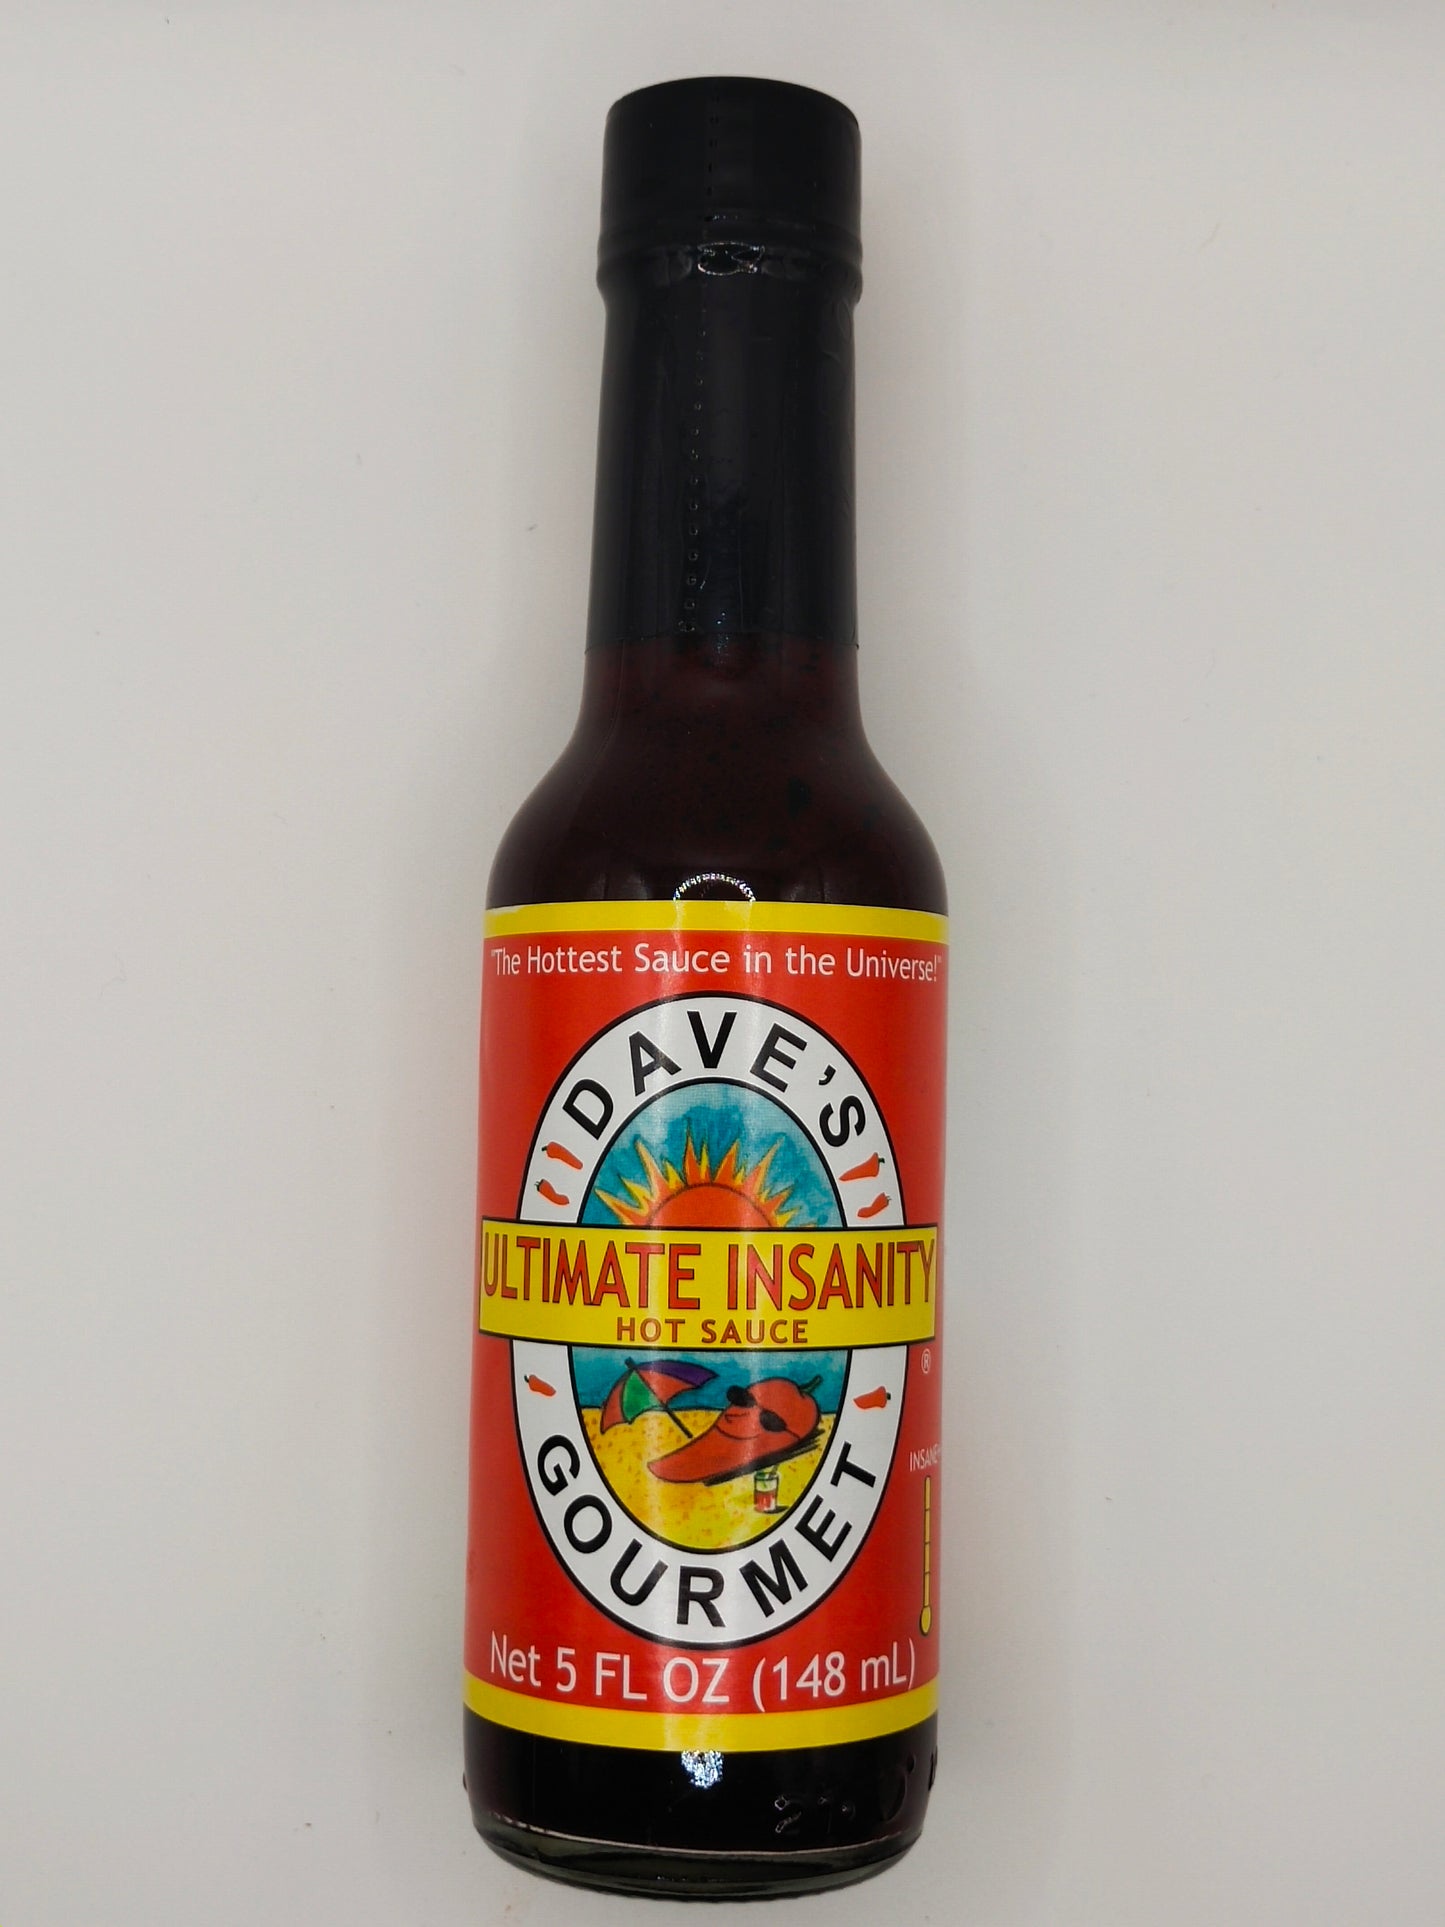 Dave's Gourmet - Ultimate Insanity Sauce